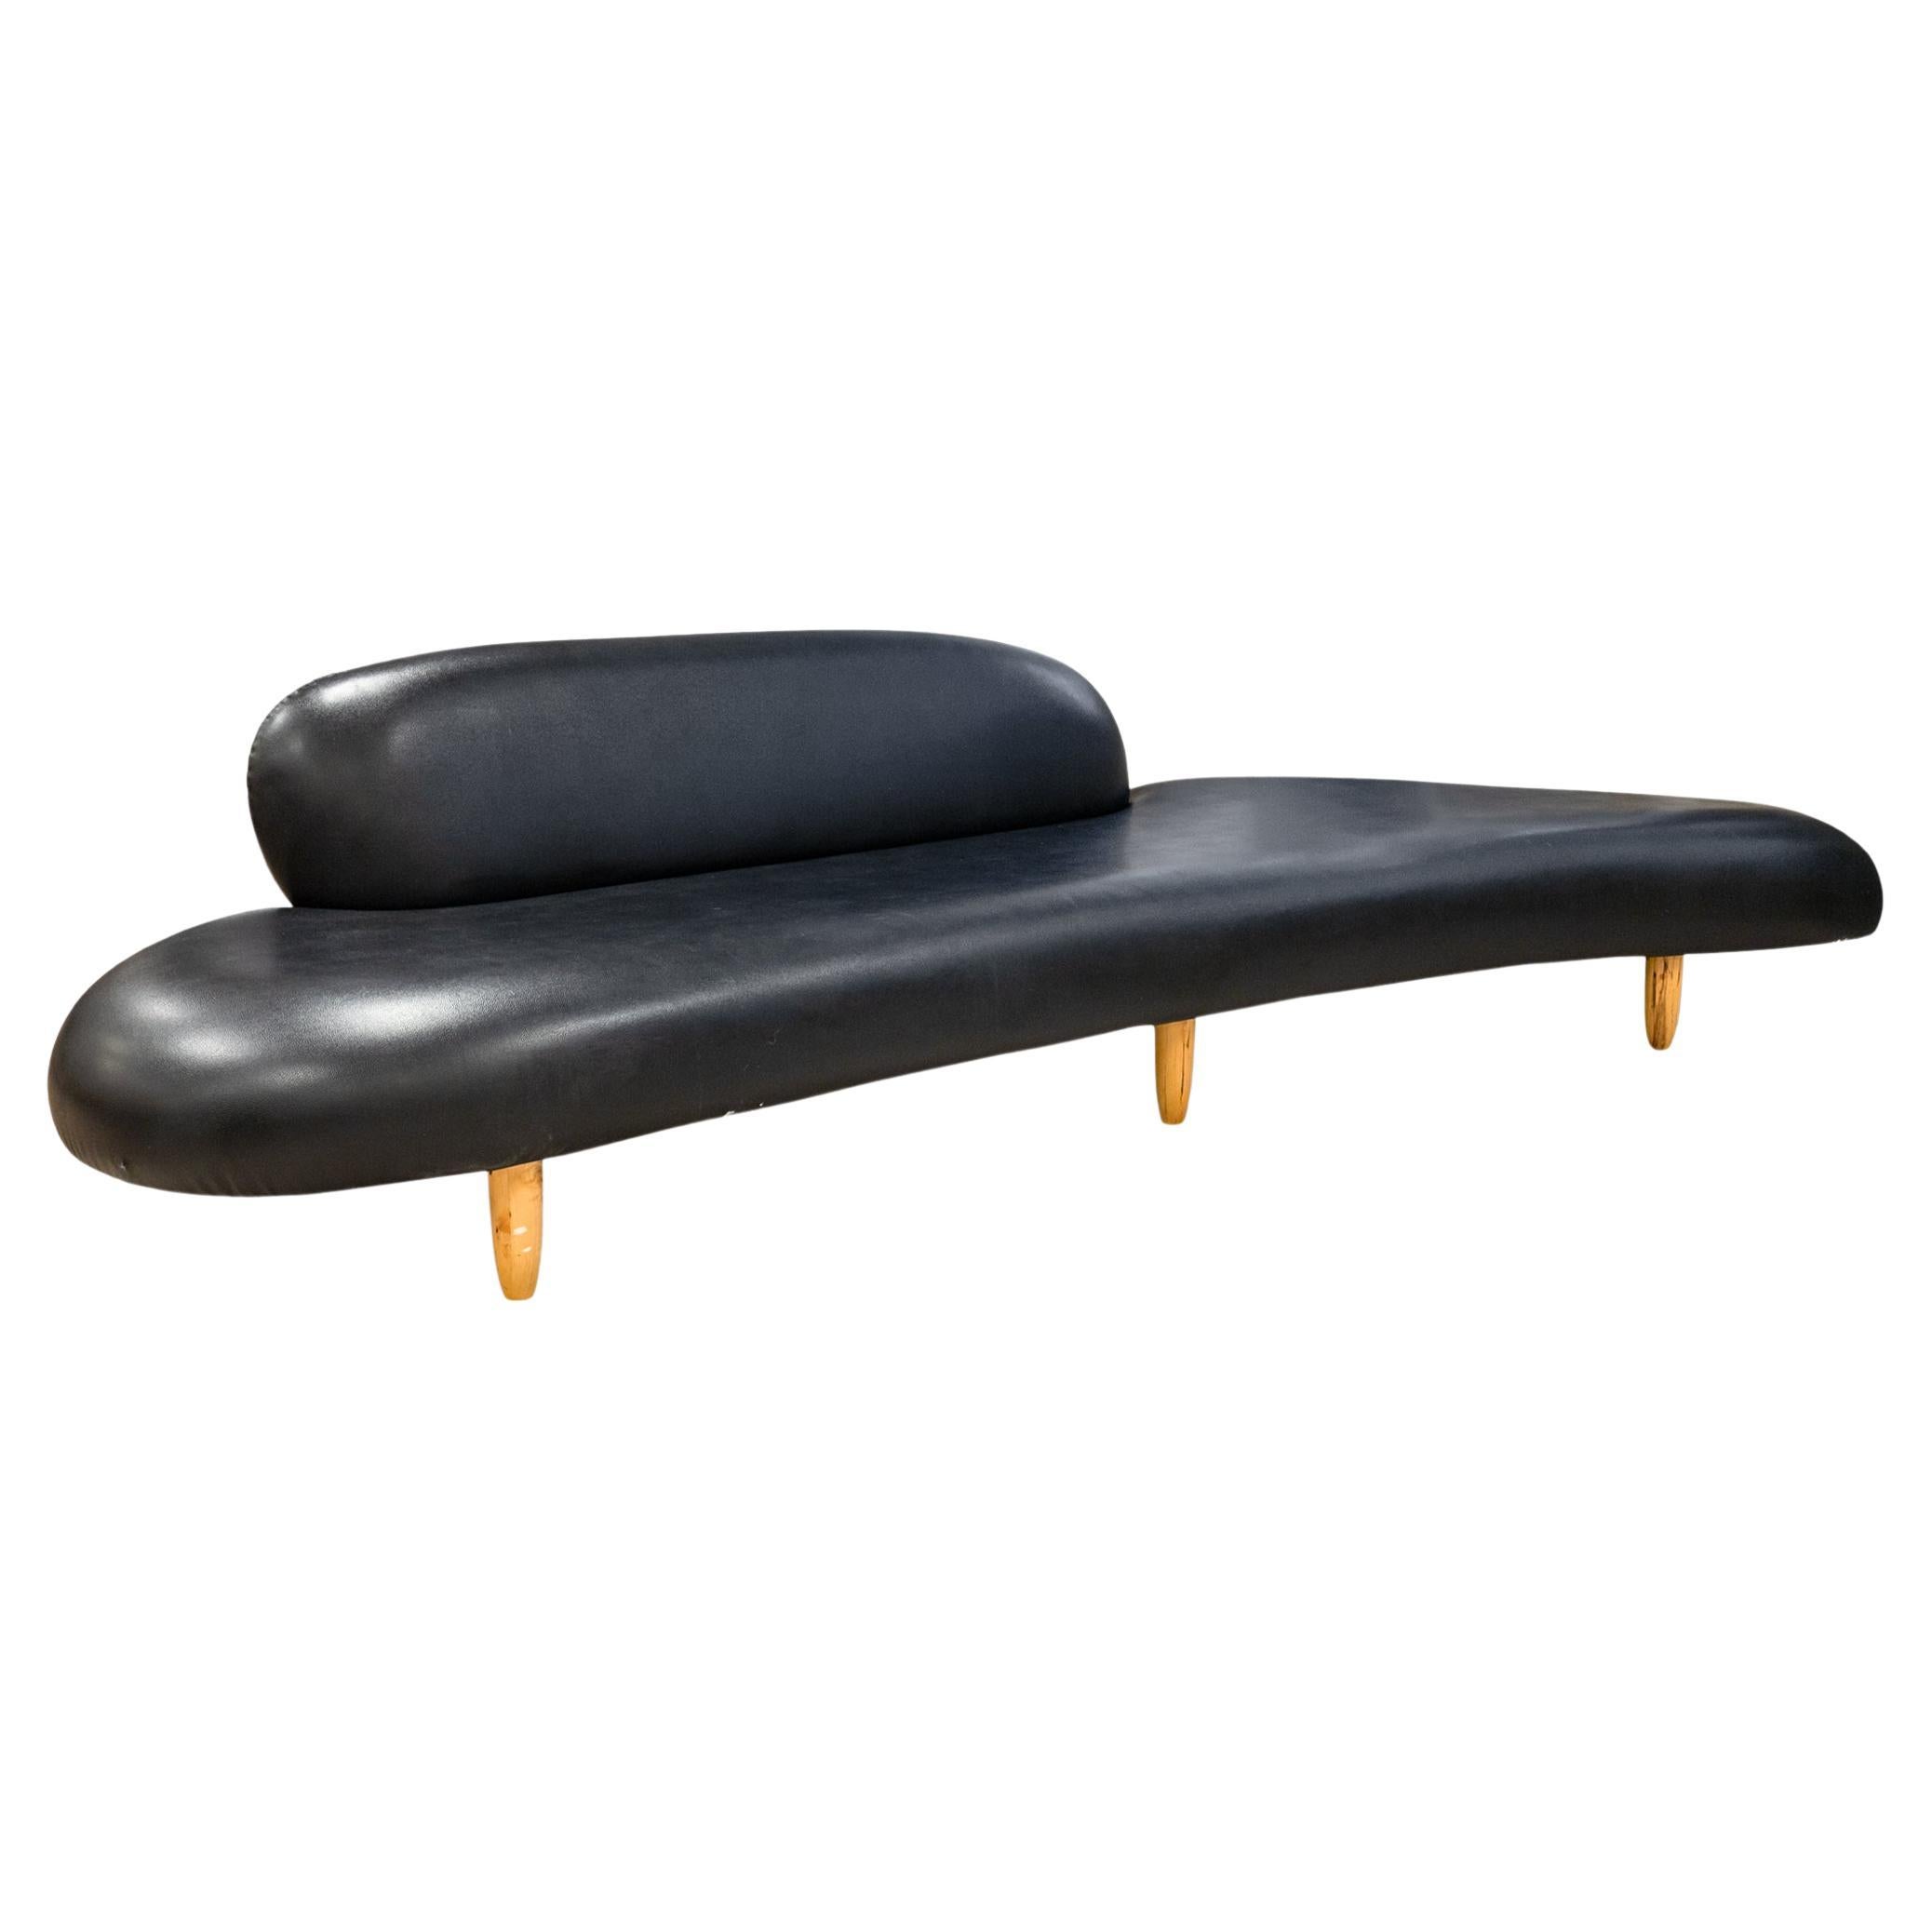 An Isamu Noguchi style freeform sofa and ottoman attributed to Vitra. A stunning piece of design history by legendary artist and designer Isamu Noguchi. This freeform sofa features a rich black leather upholstery, and a round beechwood set of legs